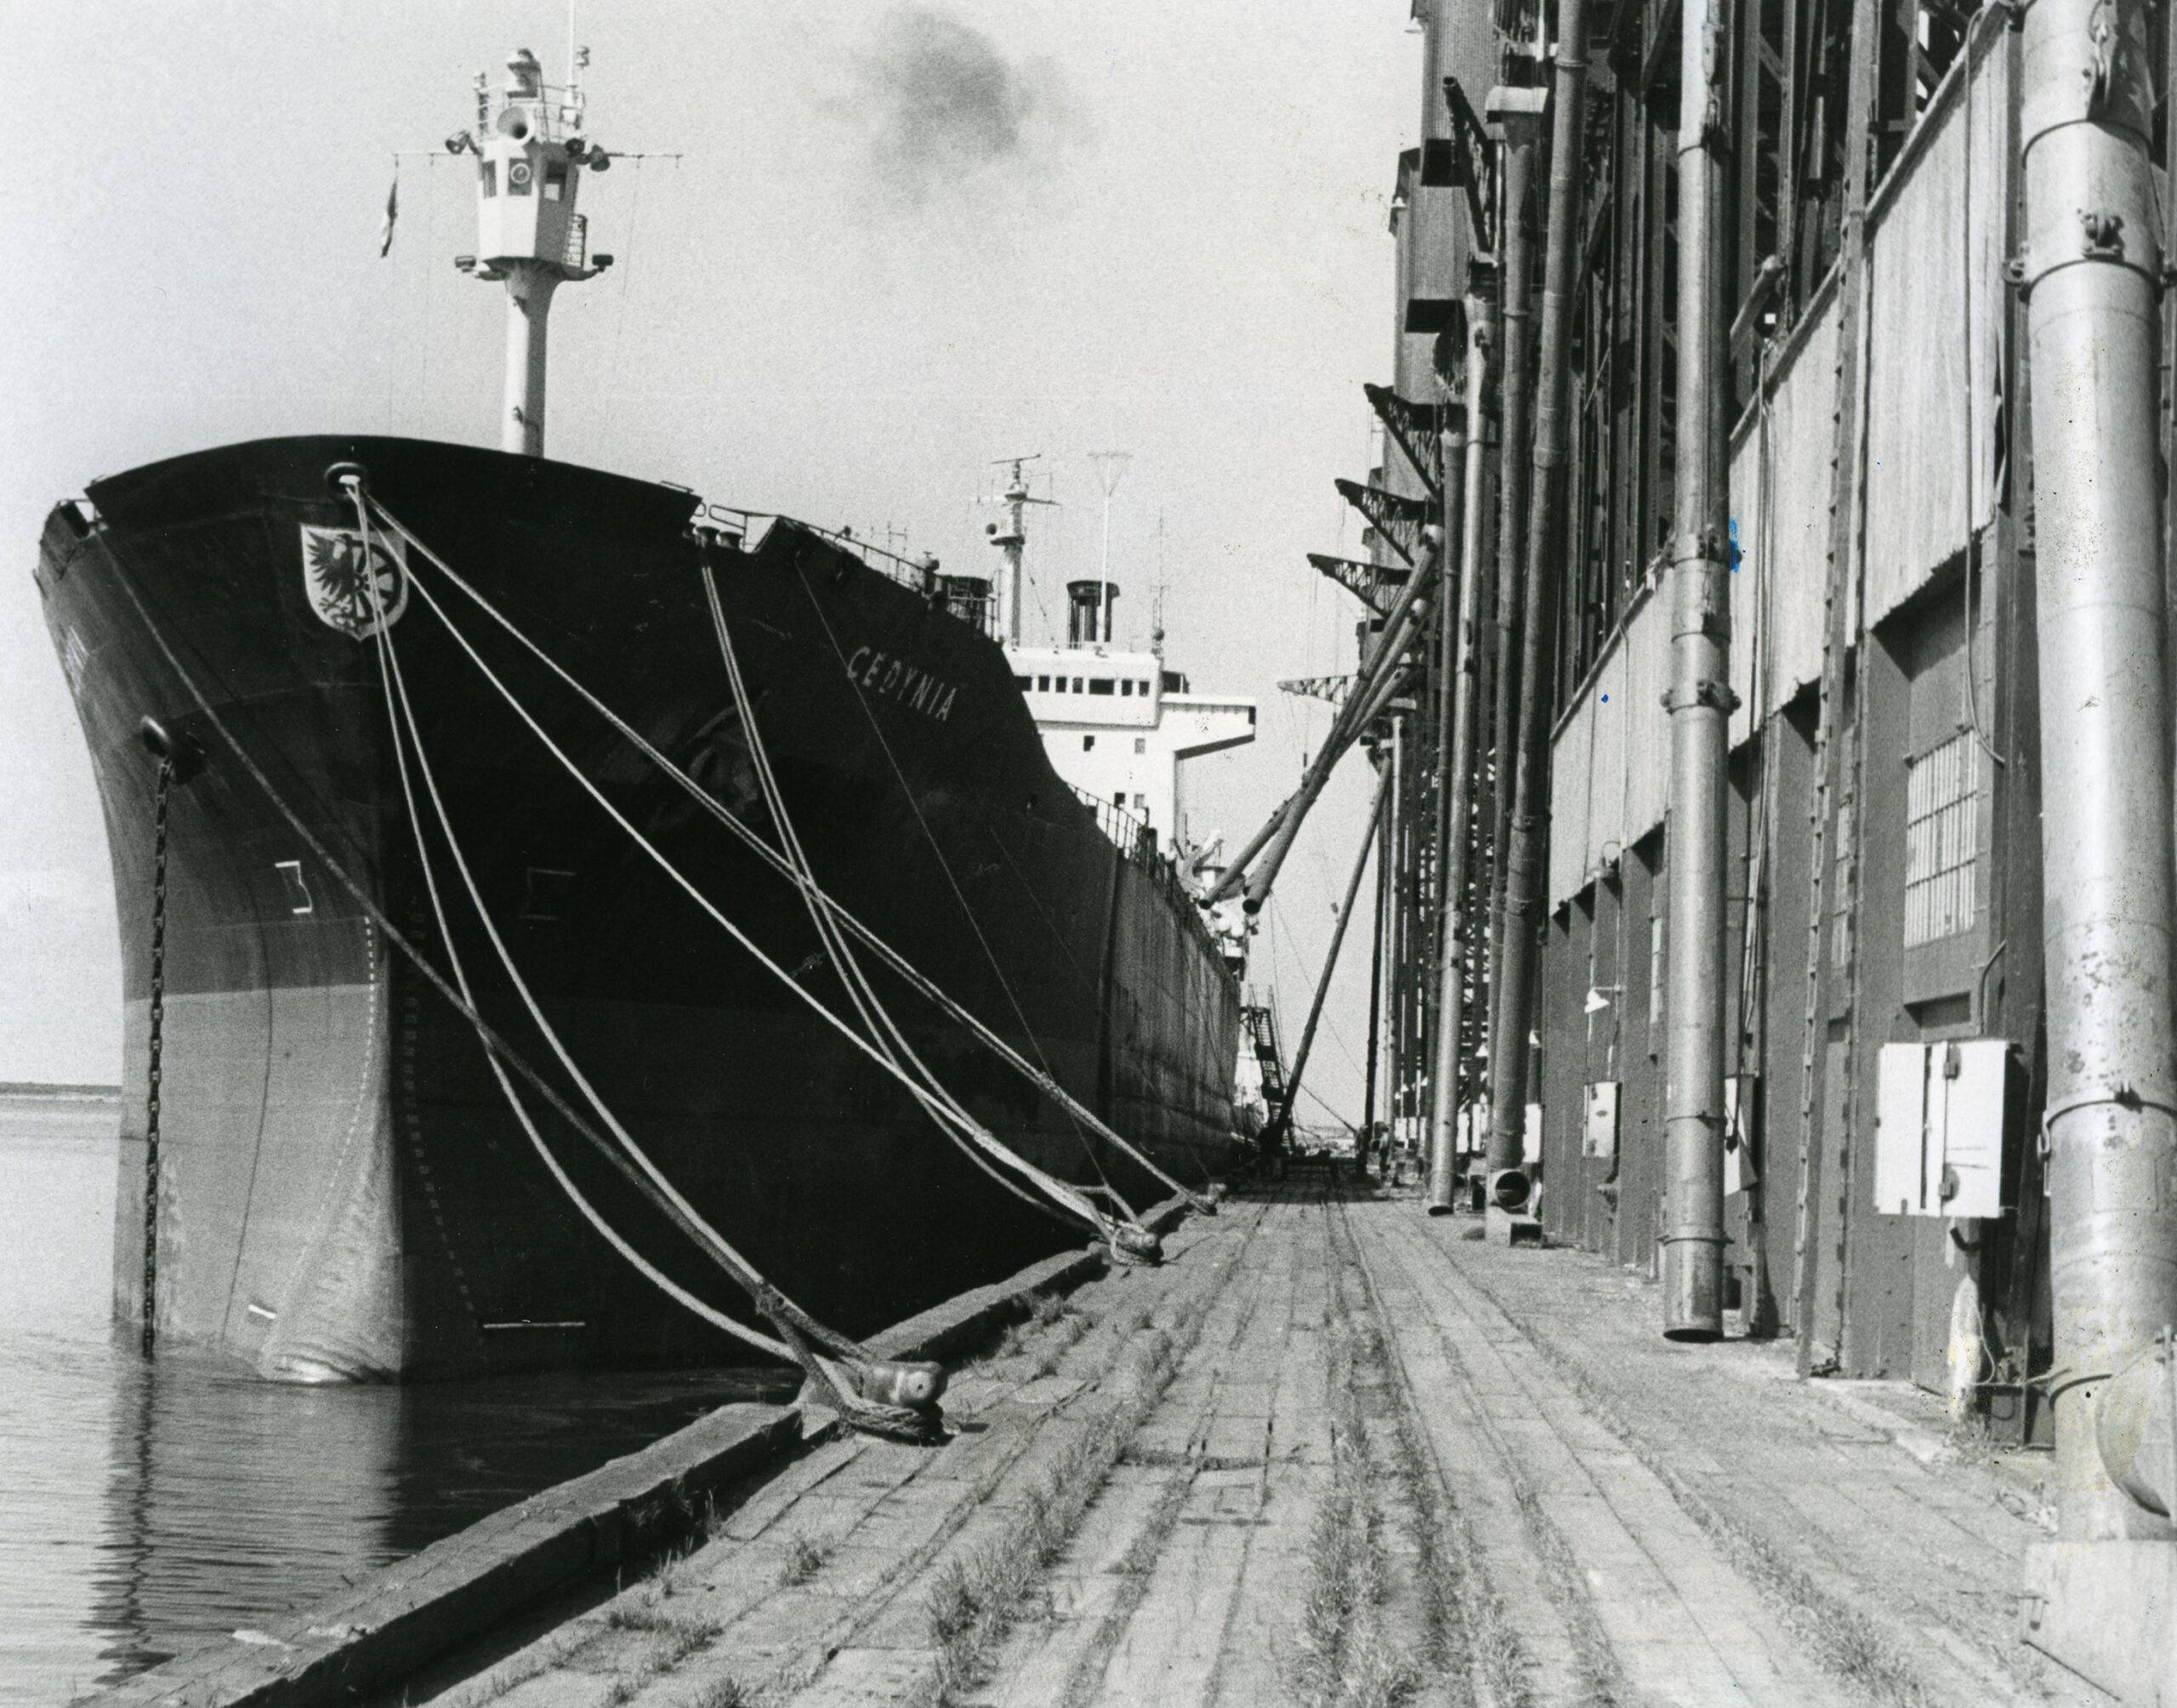 A ship at the Port of Churchill prepares for a load of grain in 1978